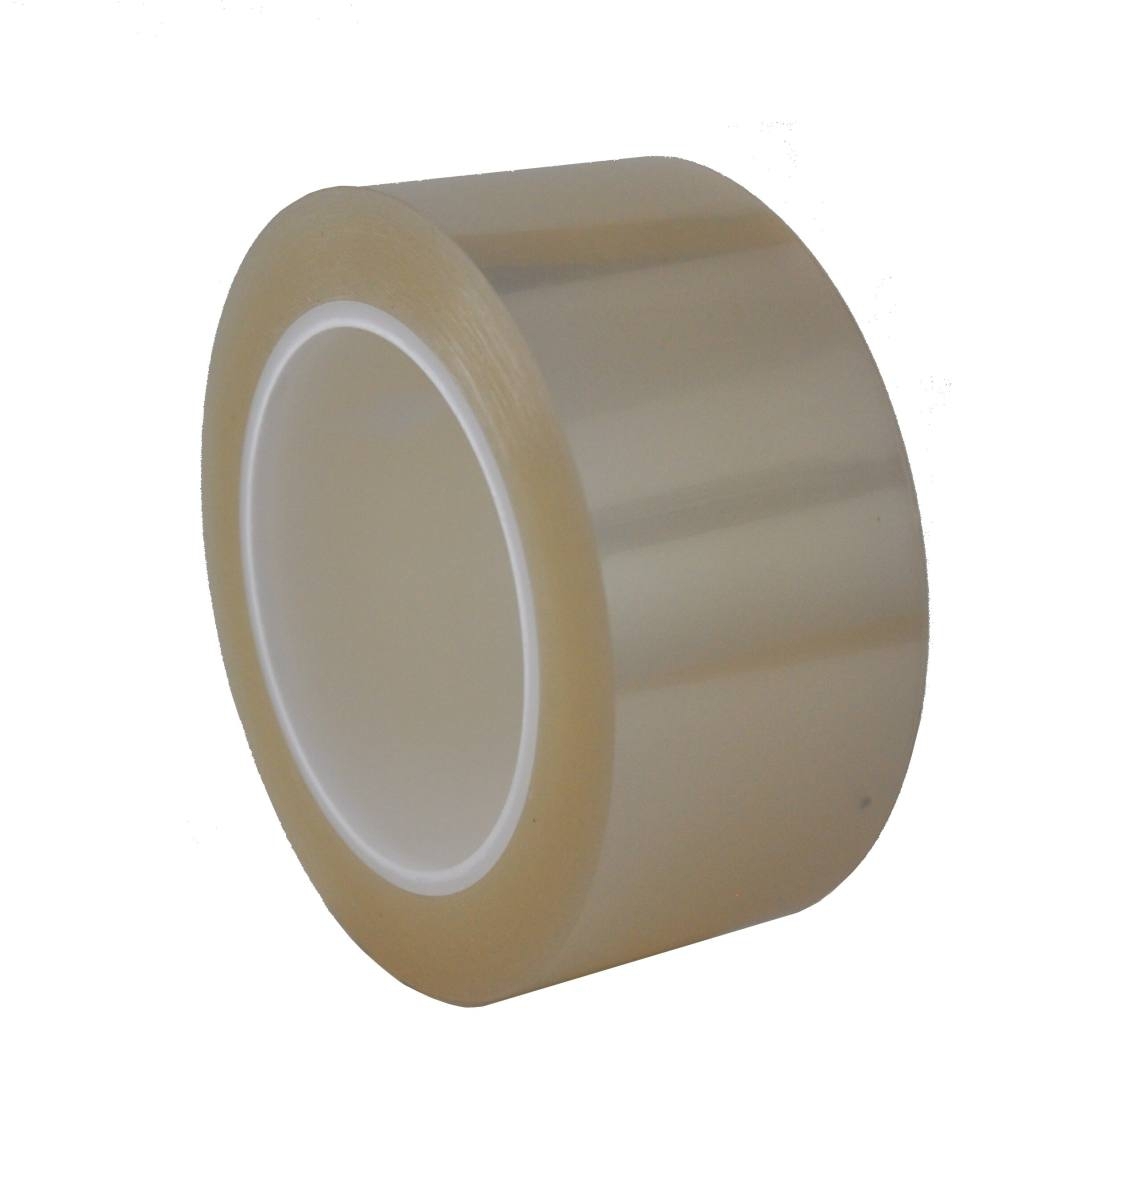 SKS fluorosilicone film, polyester film 0.075mm, 200mmx100m, coated on one side with fluorosilicone, transparent